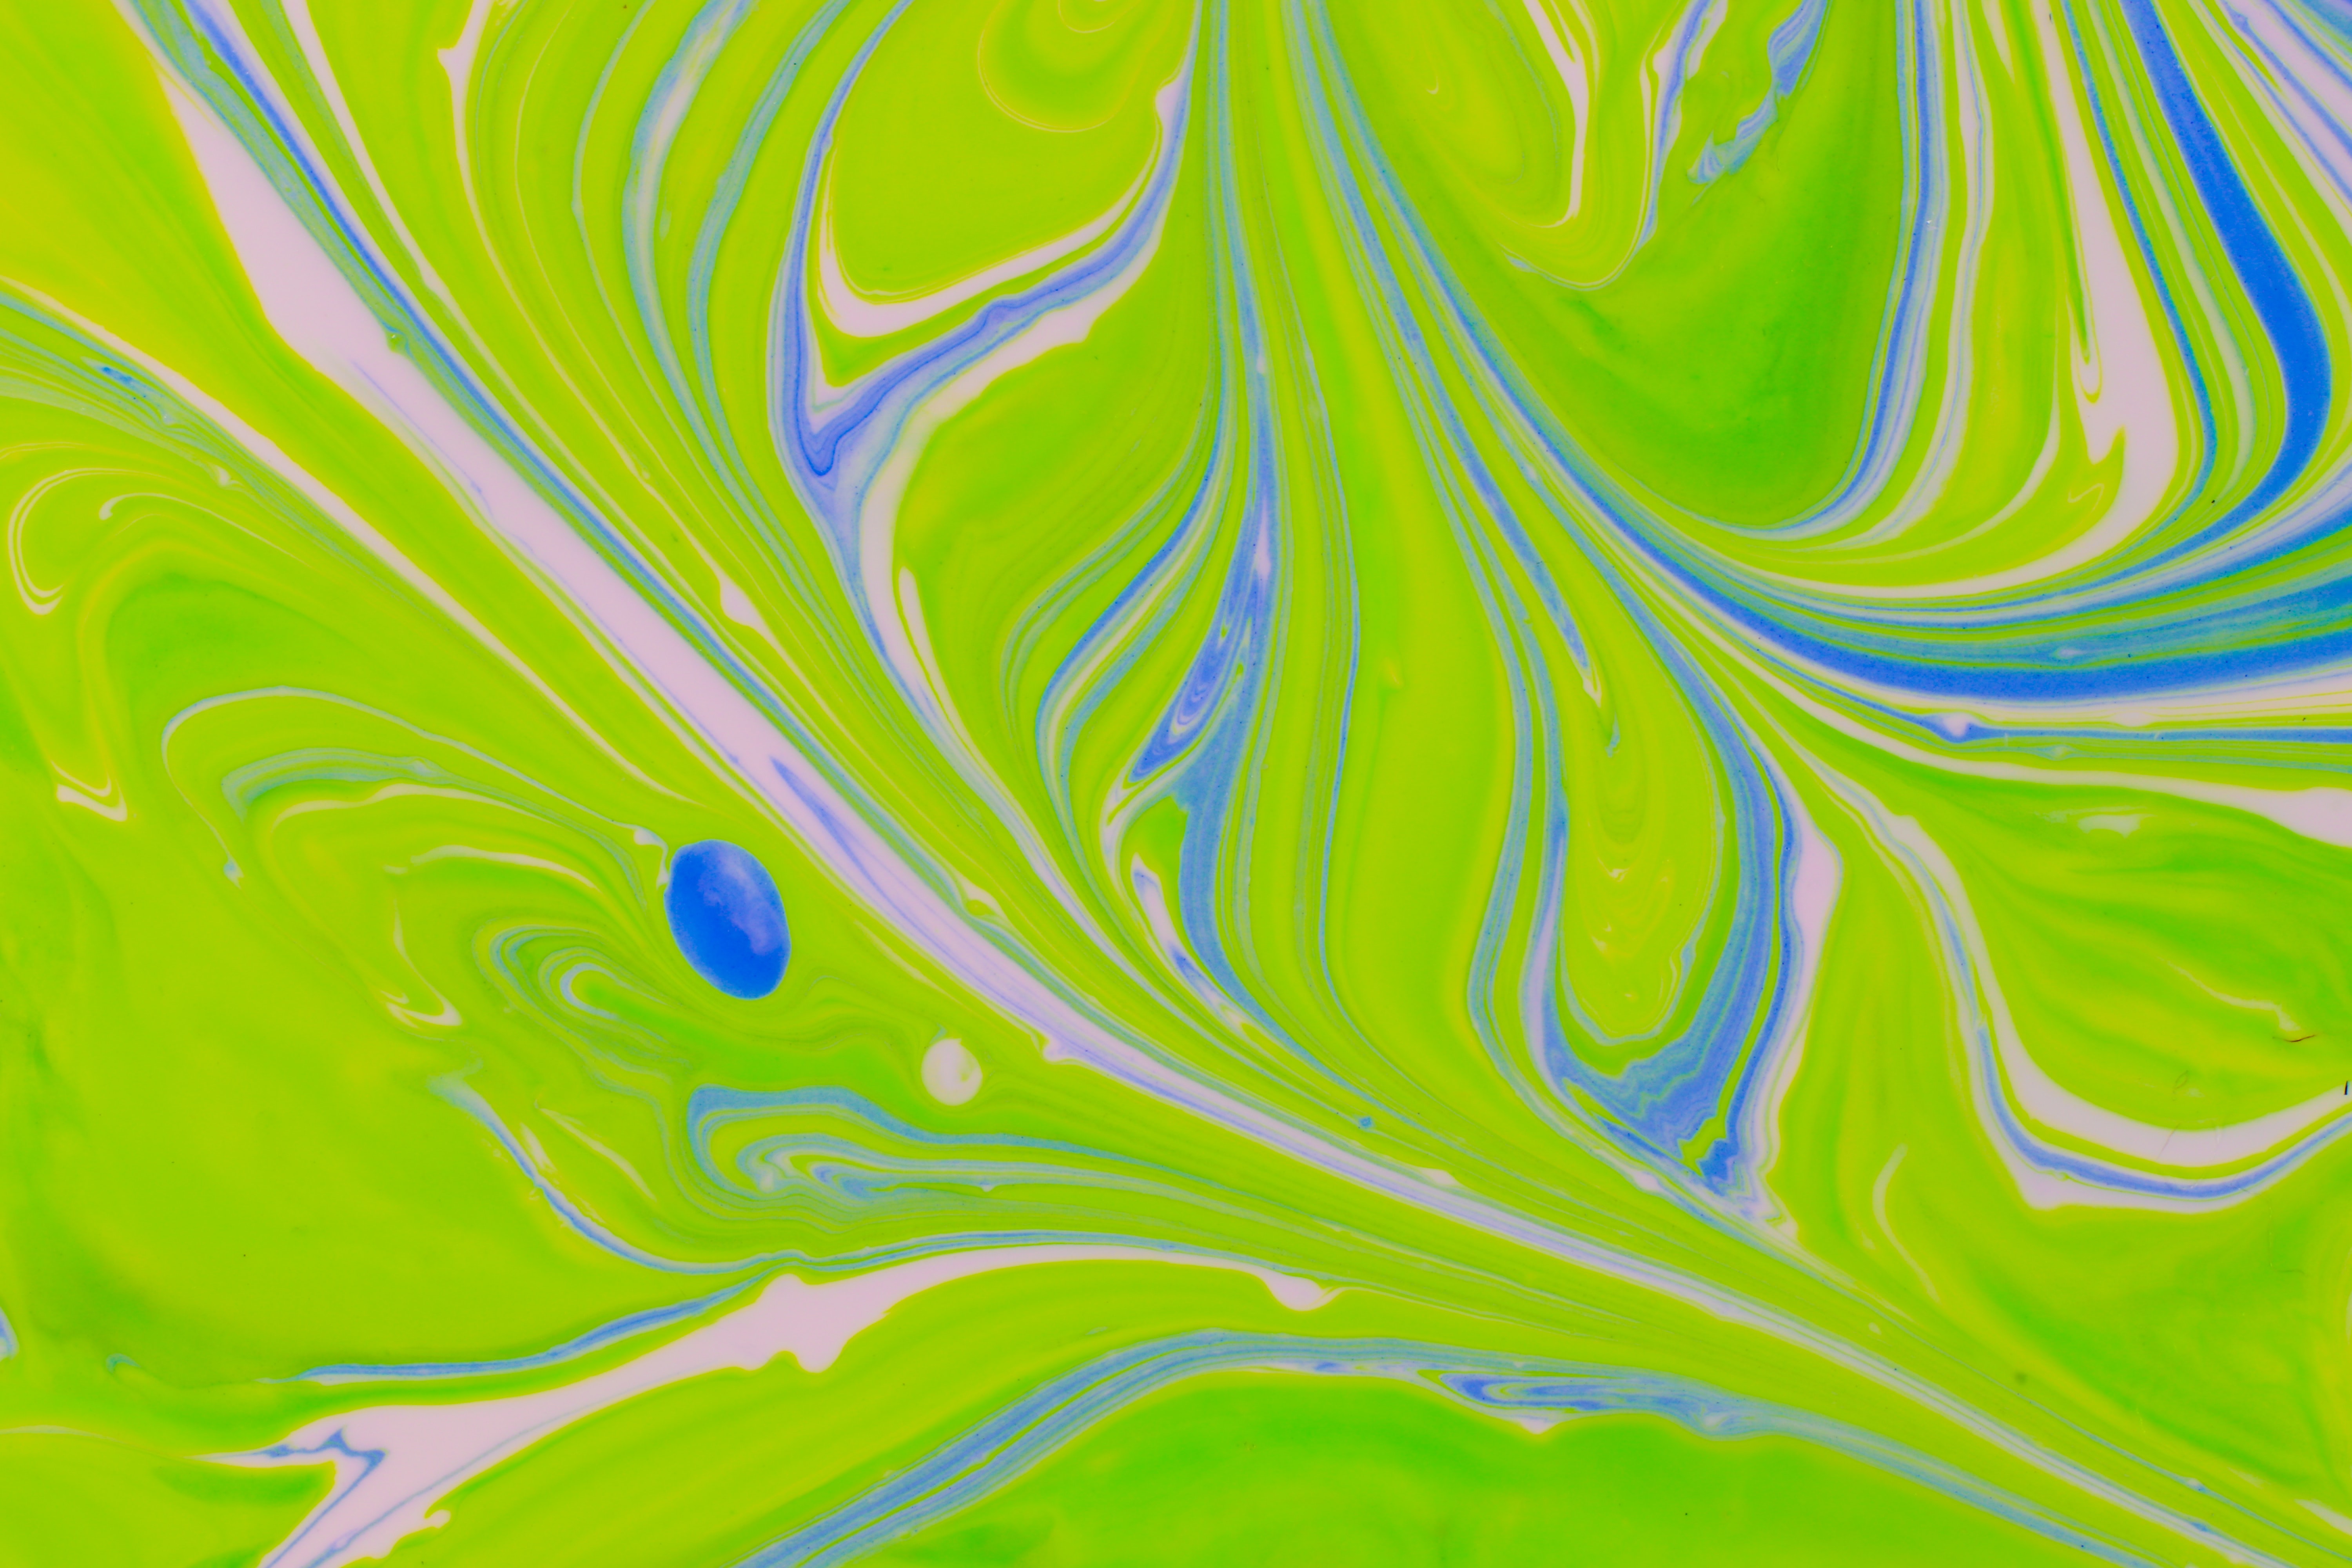 paint, abstract, white, green, blue, divorces, mixing